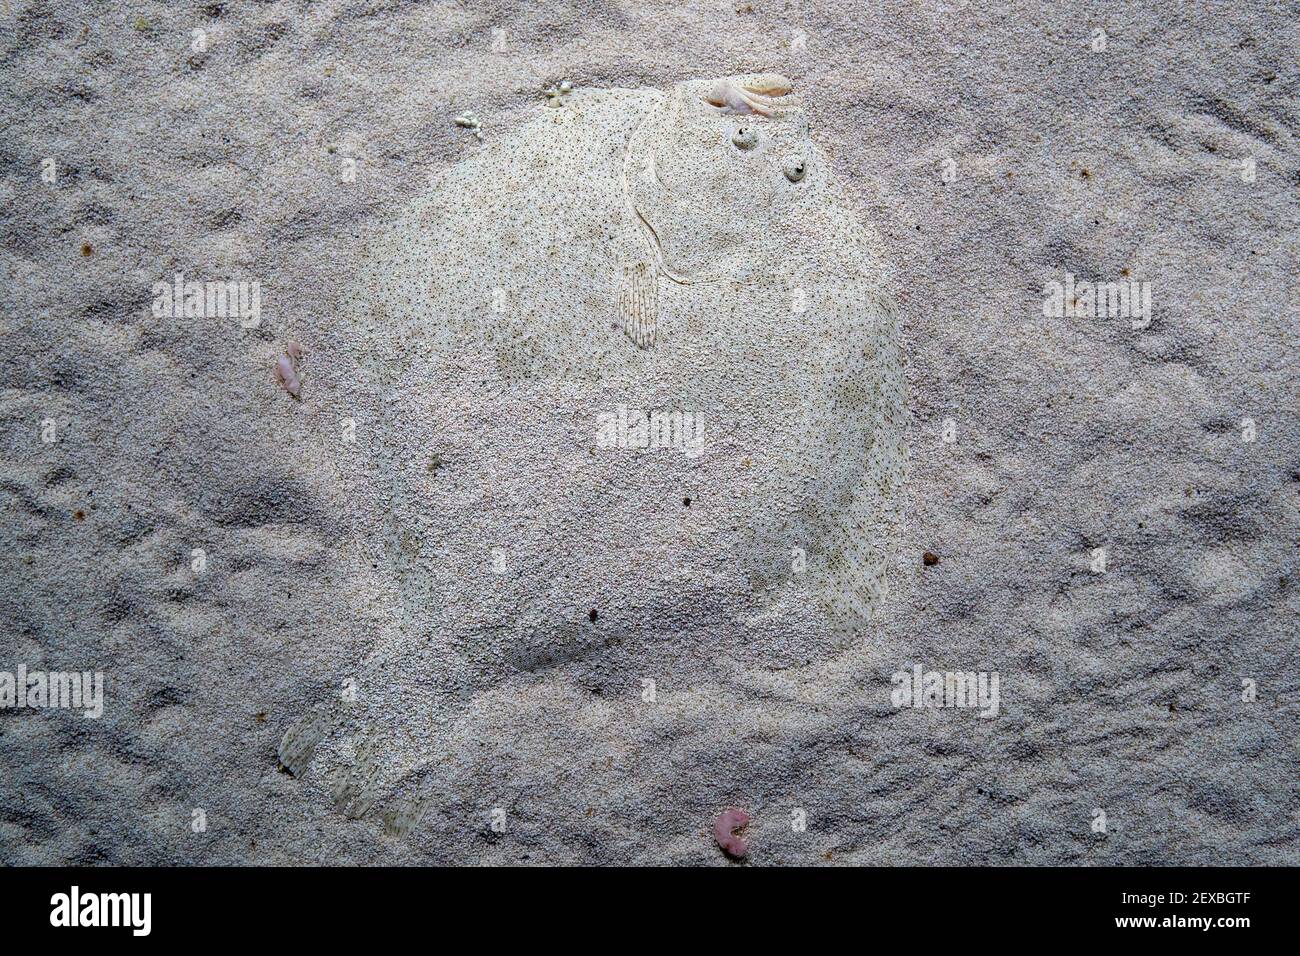 Turbot flat fish underwater hiding in the sand Stock Photo